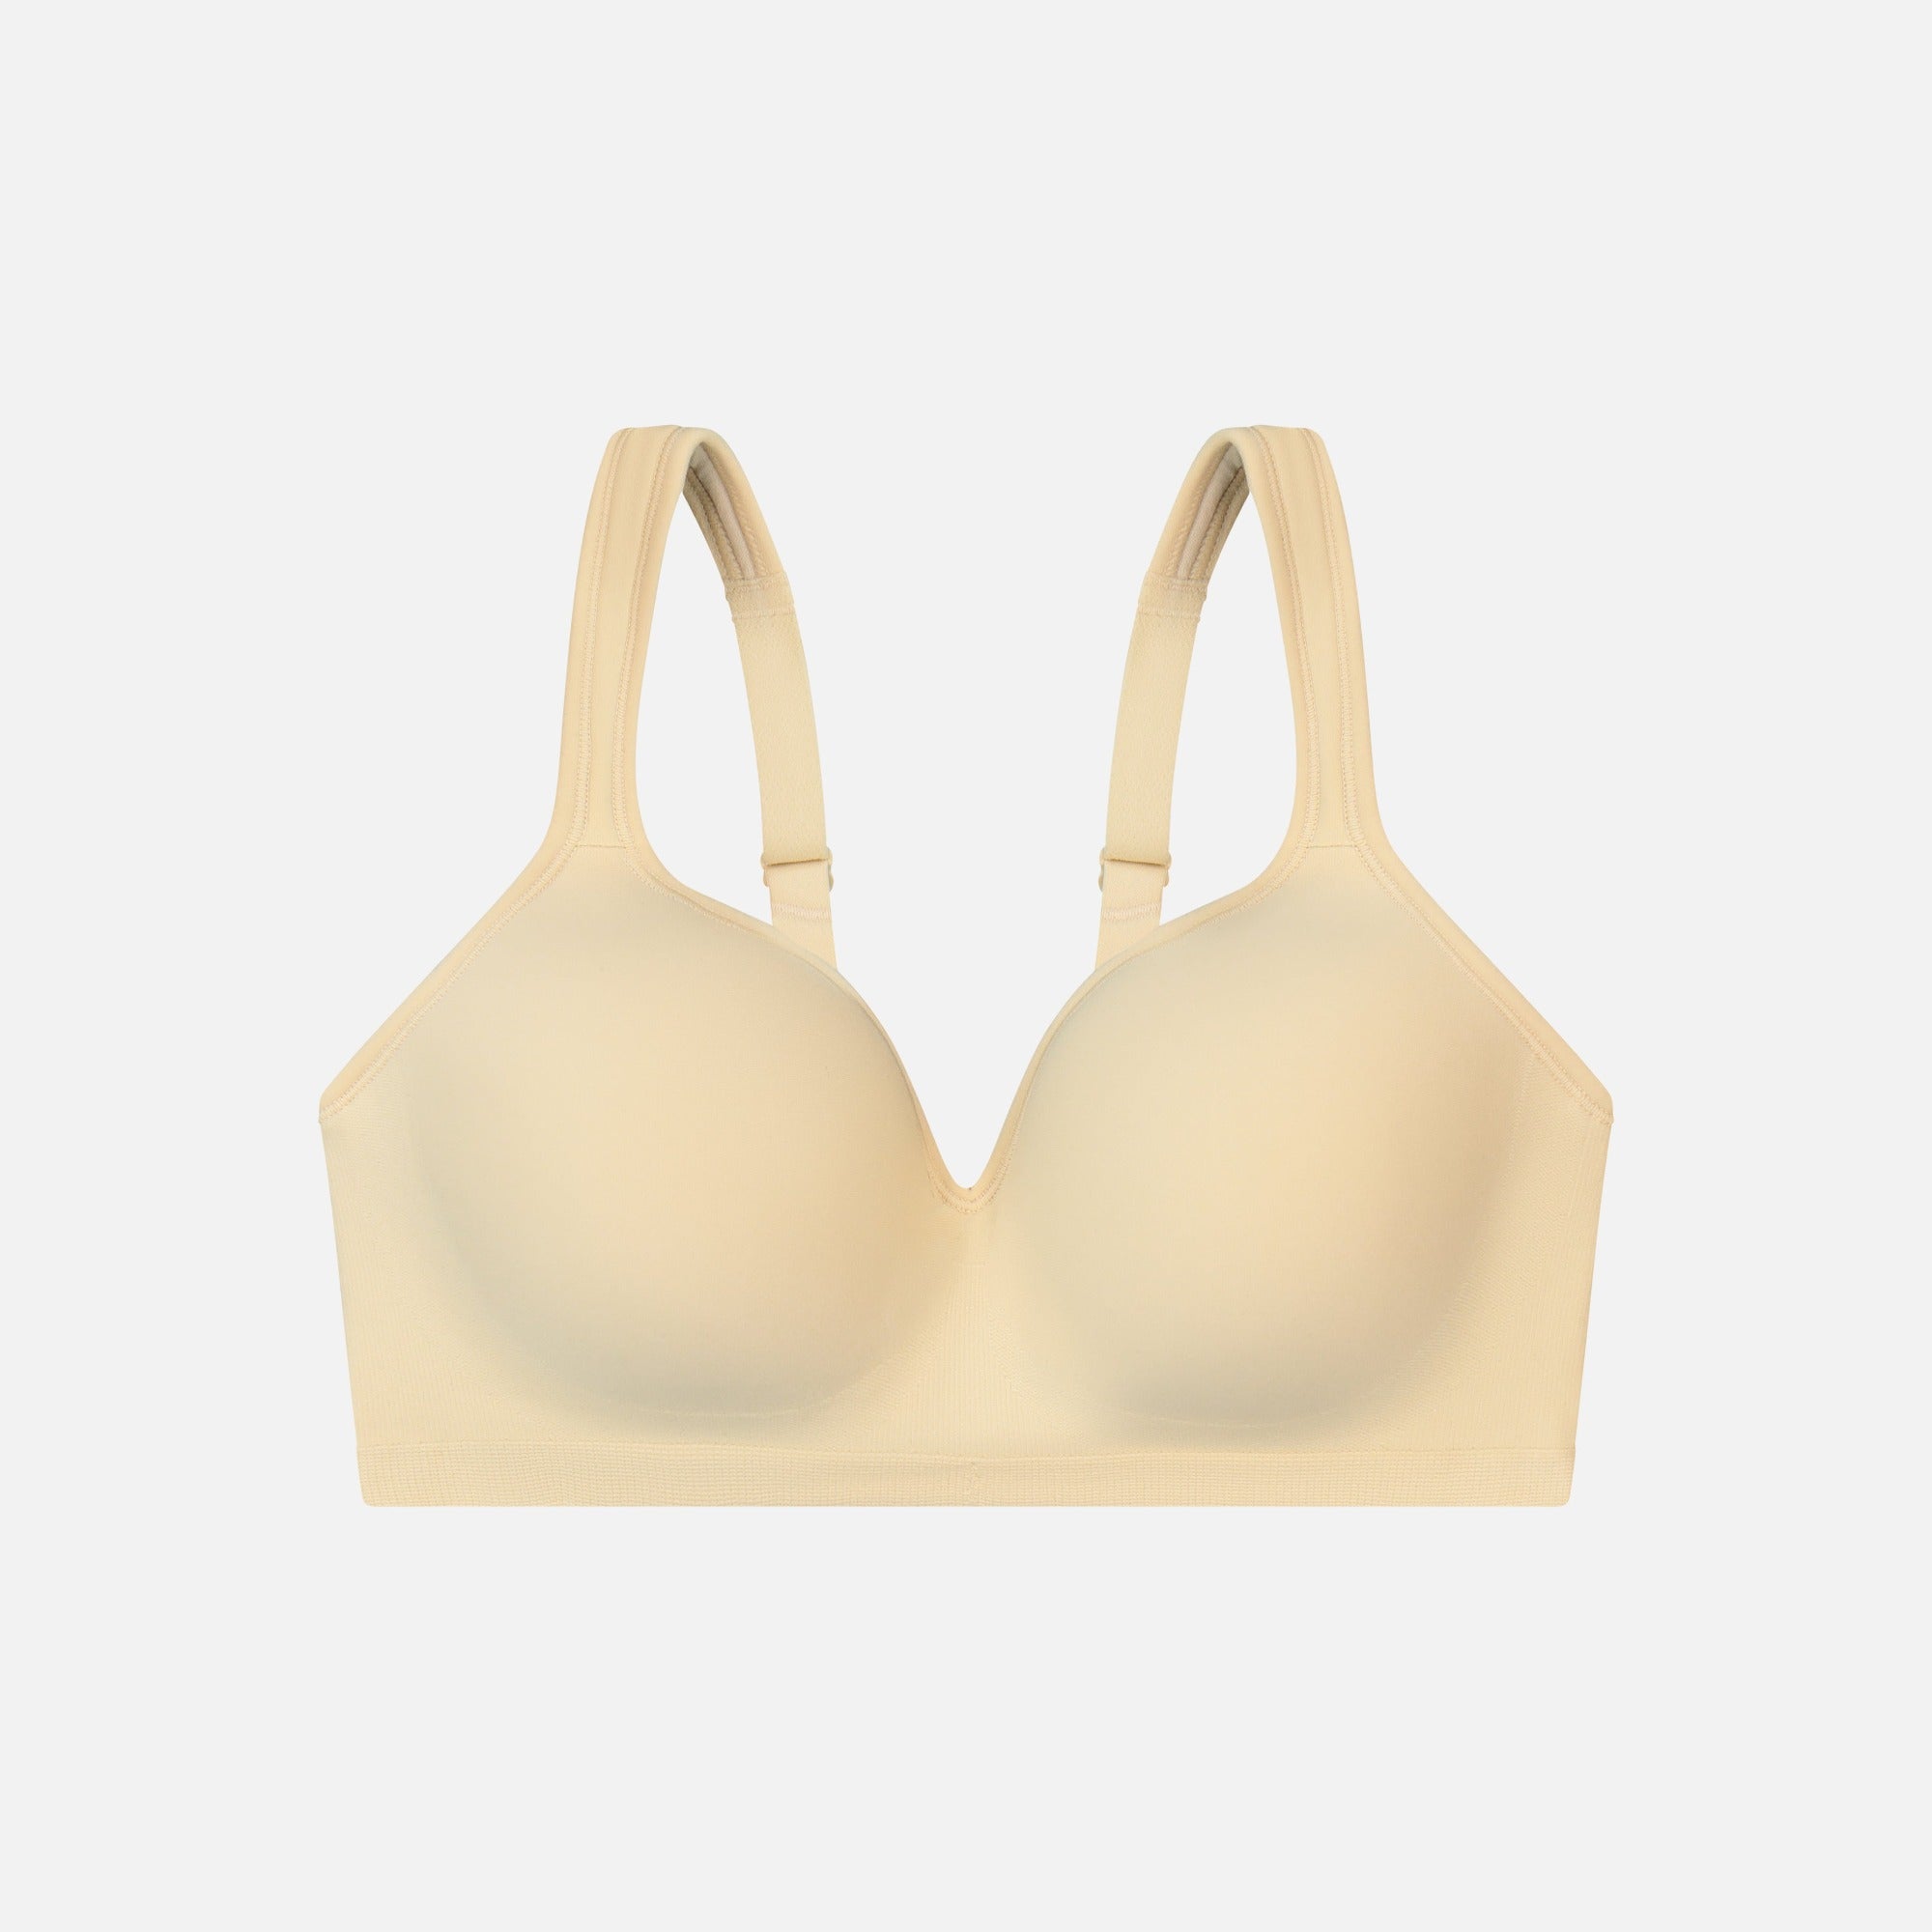 Underoutfit Comfort Shaping Bra - Wireless Everyday Bra with